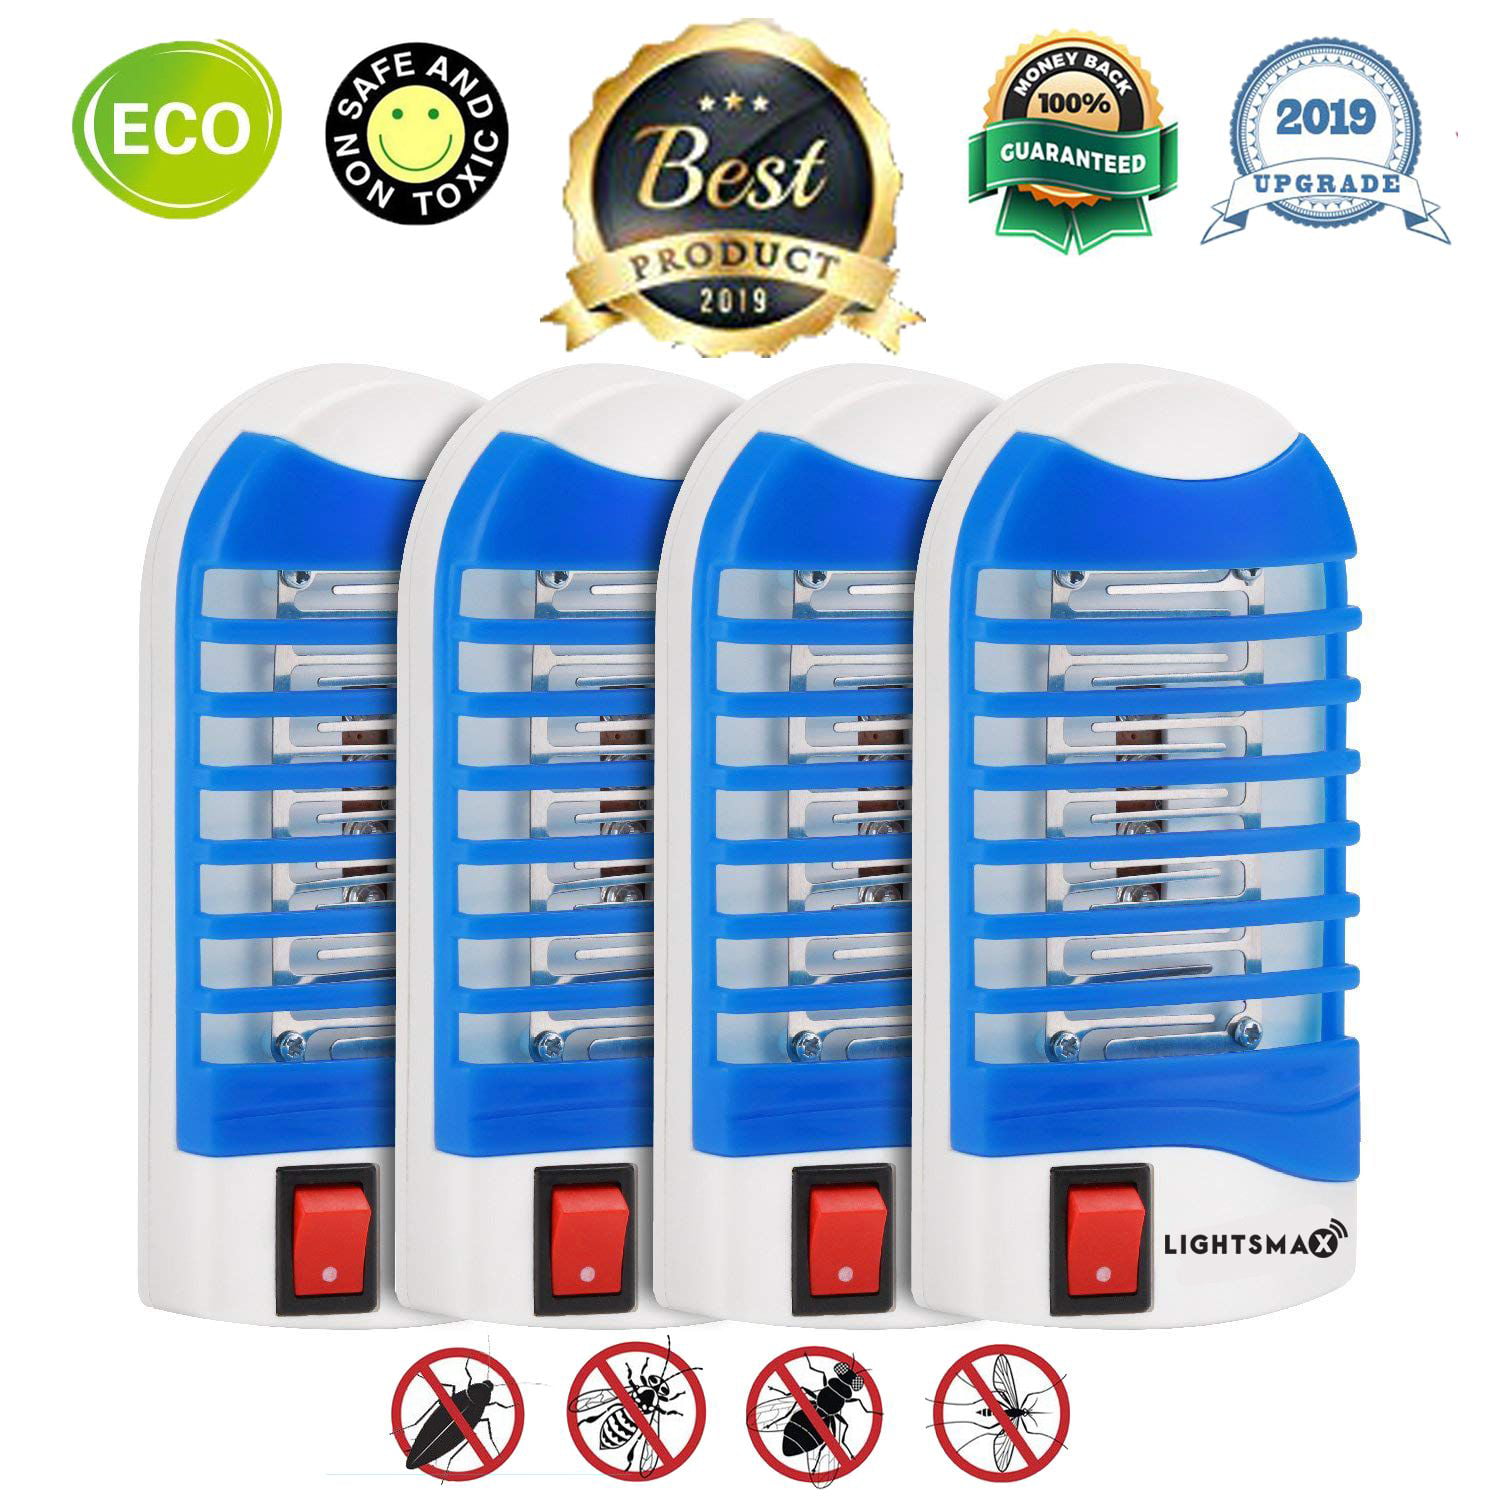 Powerful Mosquito Repellent Pest Control Traps for Indoor and Outdoor Bug Zapper Insect Killer Fly Repellent Electric with Night Light Mosquito Killer Lamp 